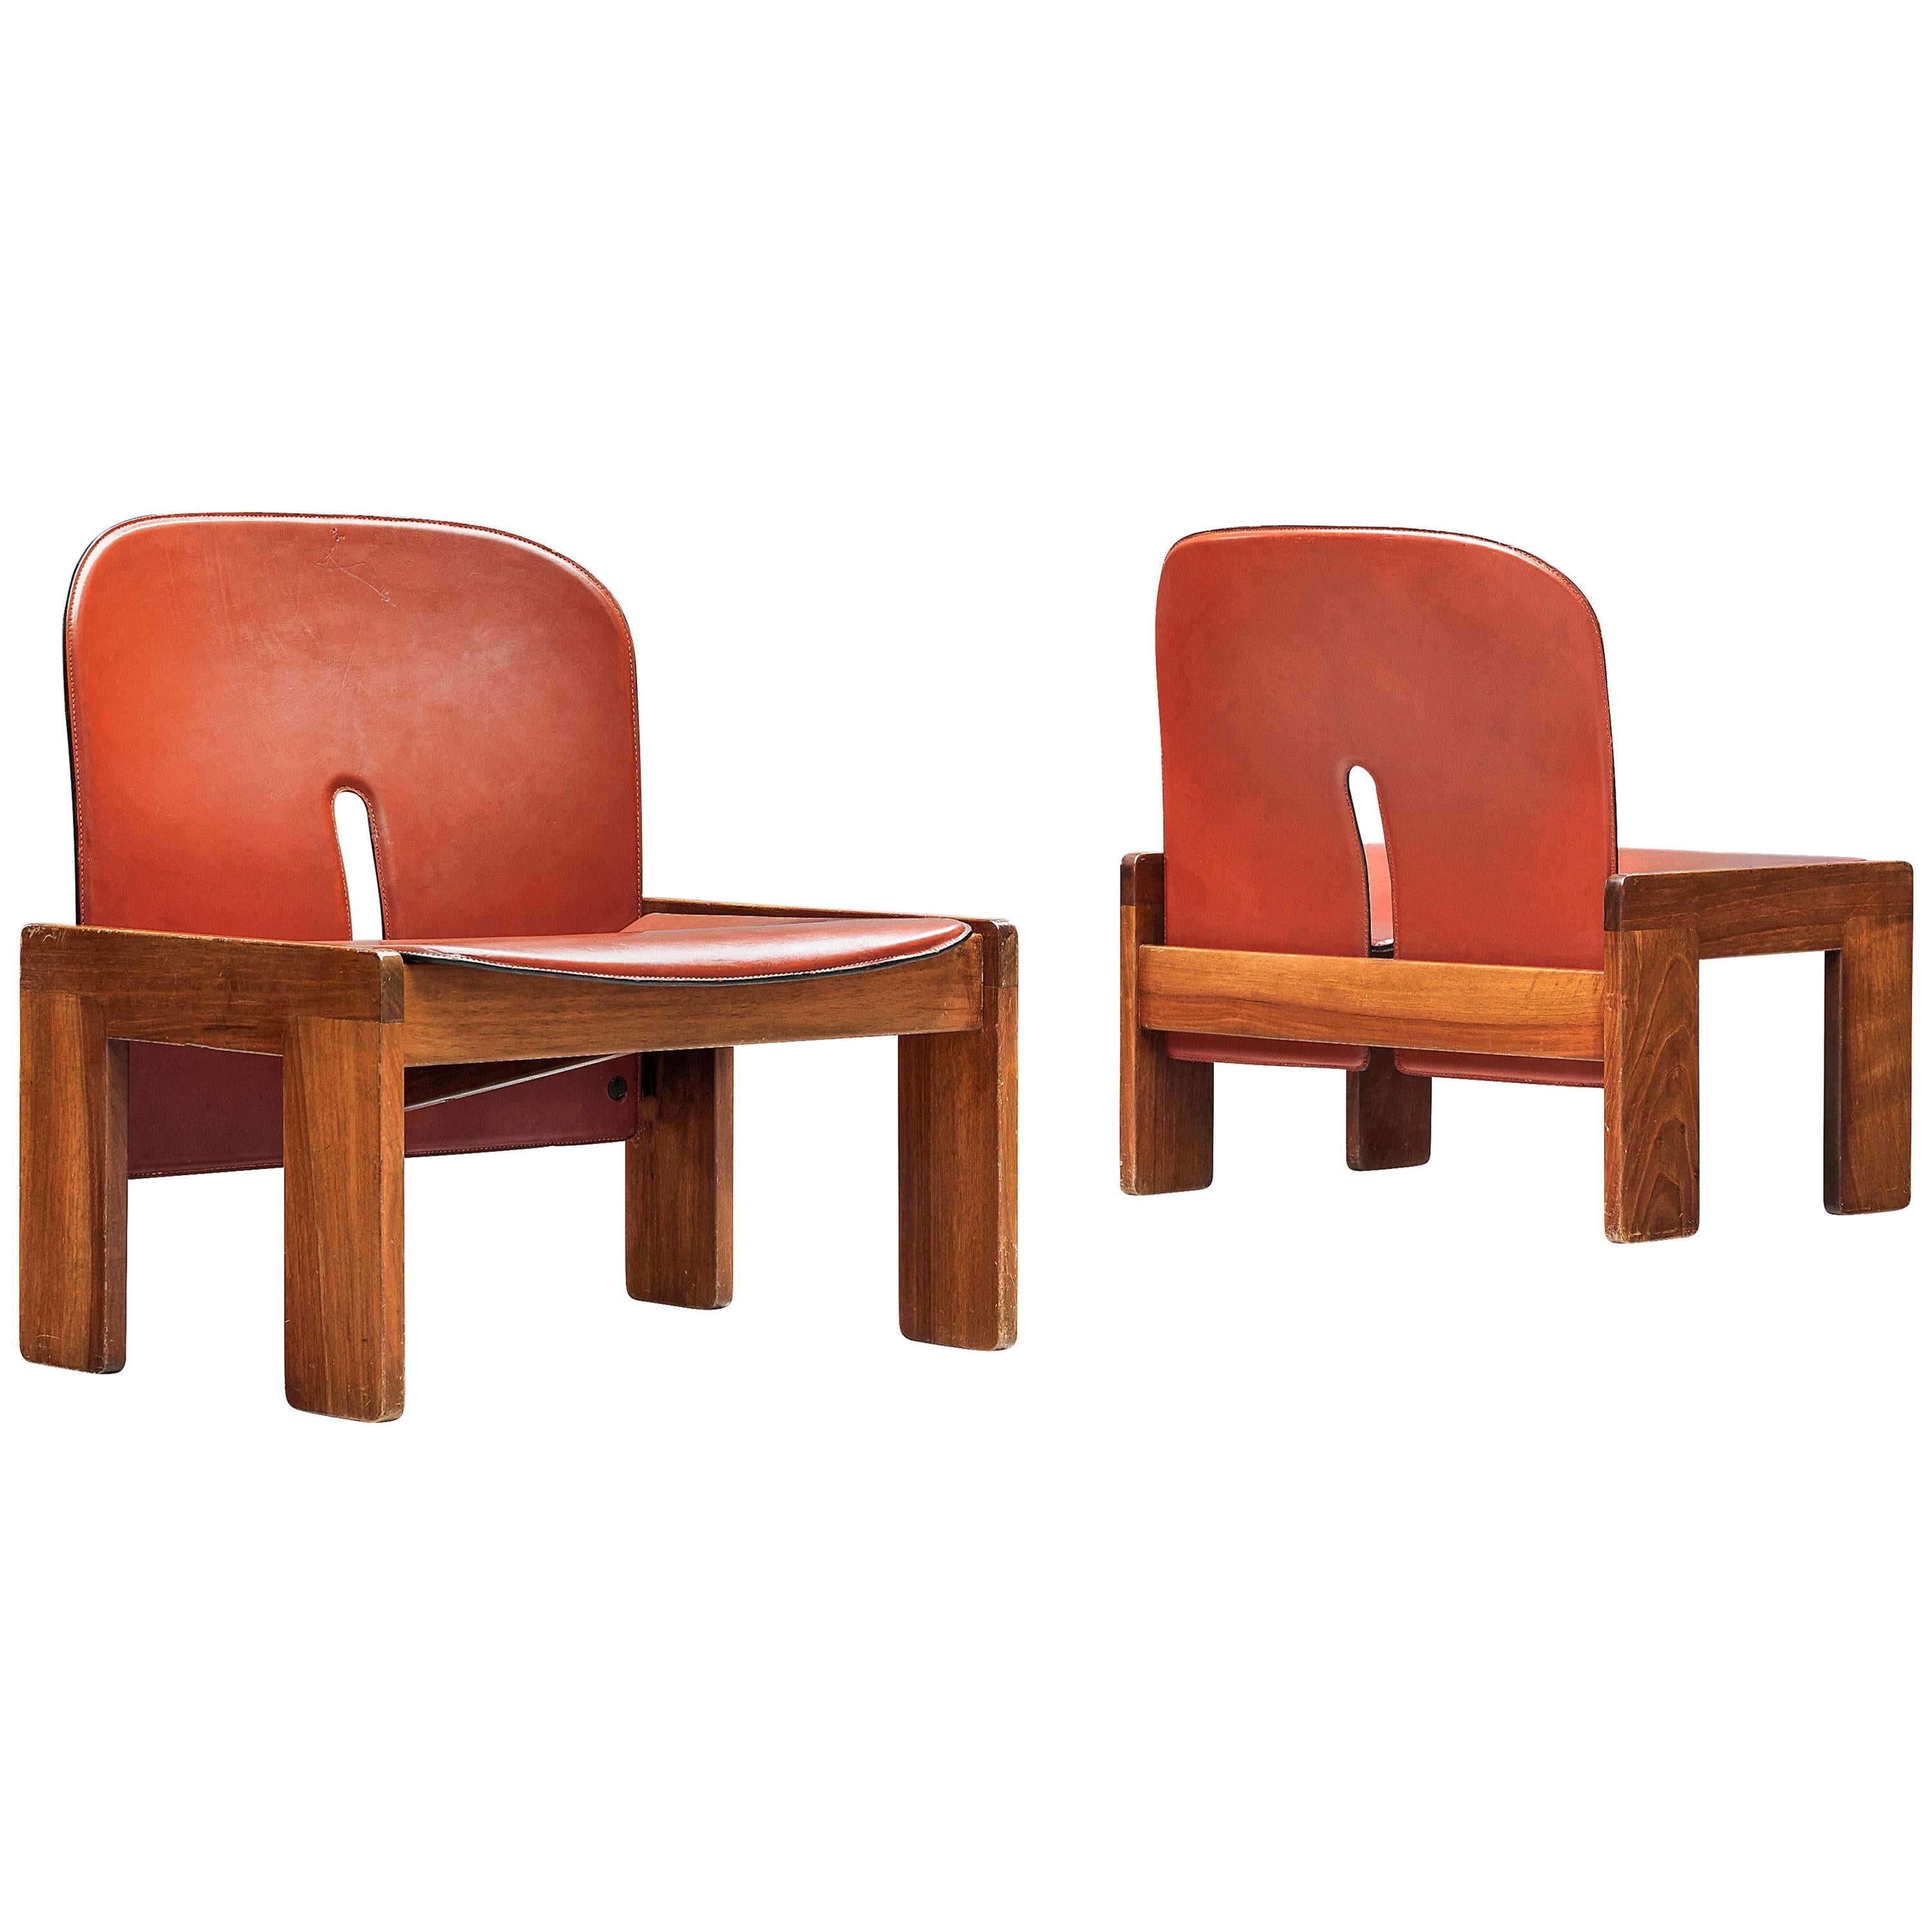 Afra & Tobia Scarpa Pair of Lounge Chairs Model '925' in Walnut and Red Leather